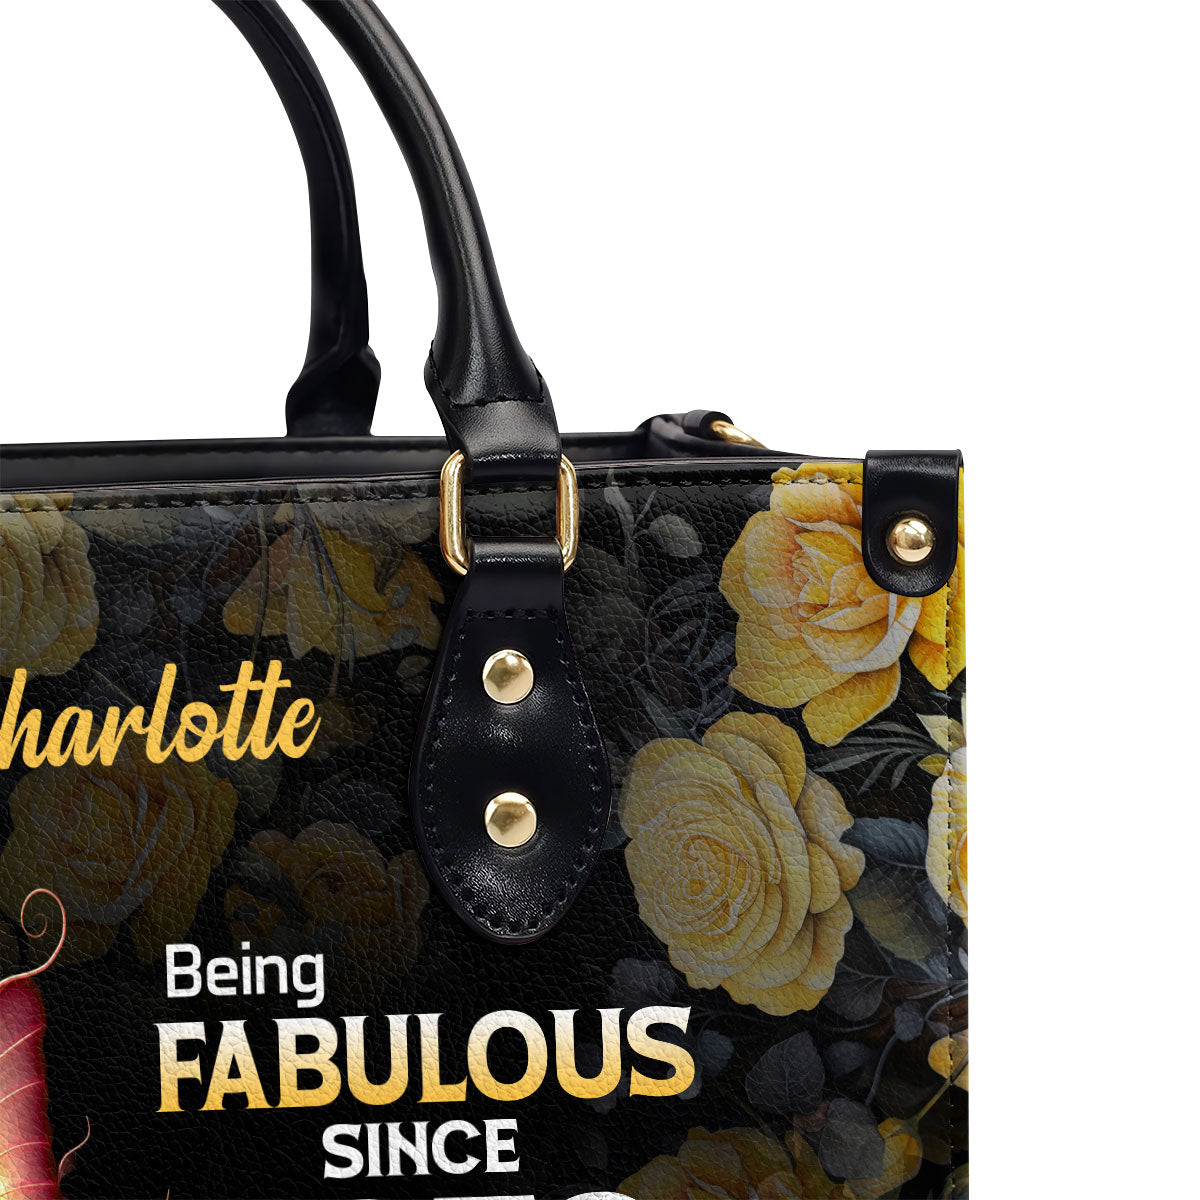 Being Fabulous With Grace and Mercy - Personalized Leather Handbag MS-H98